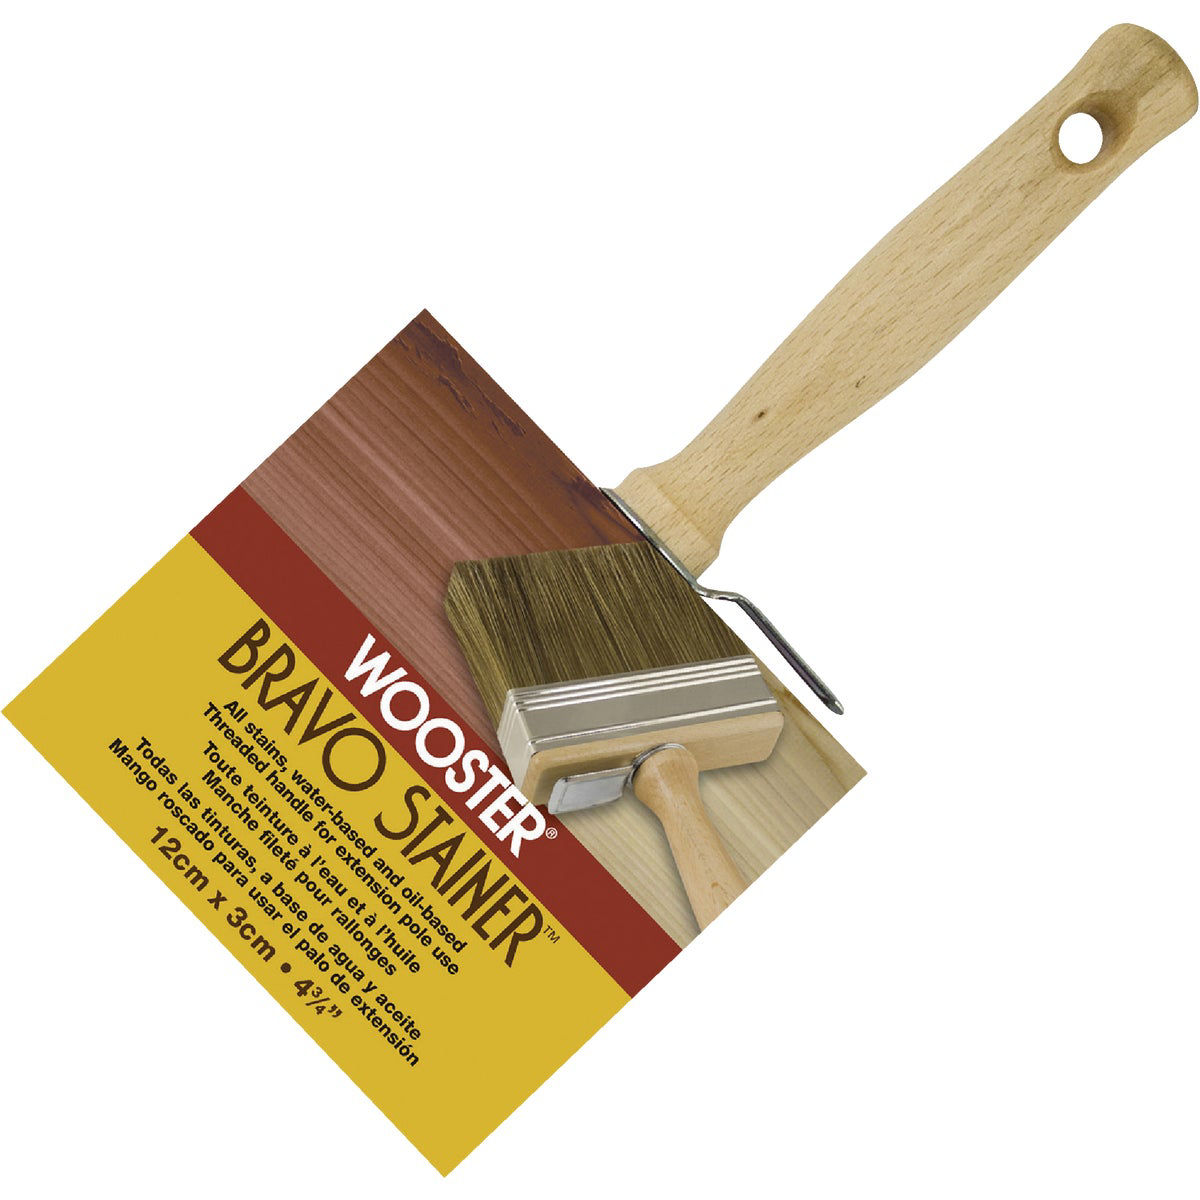 Cleaning Tools & Accessories - Wooster Brush Company